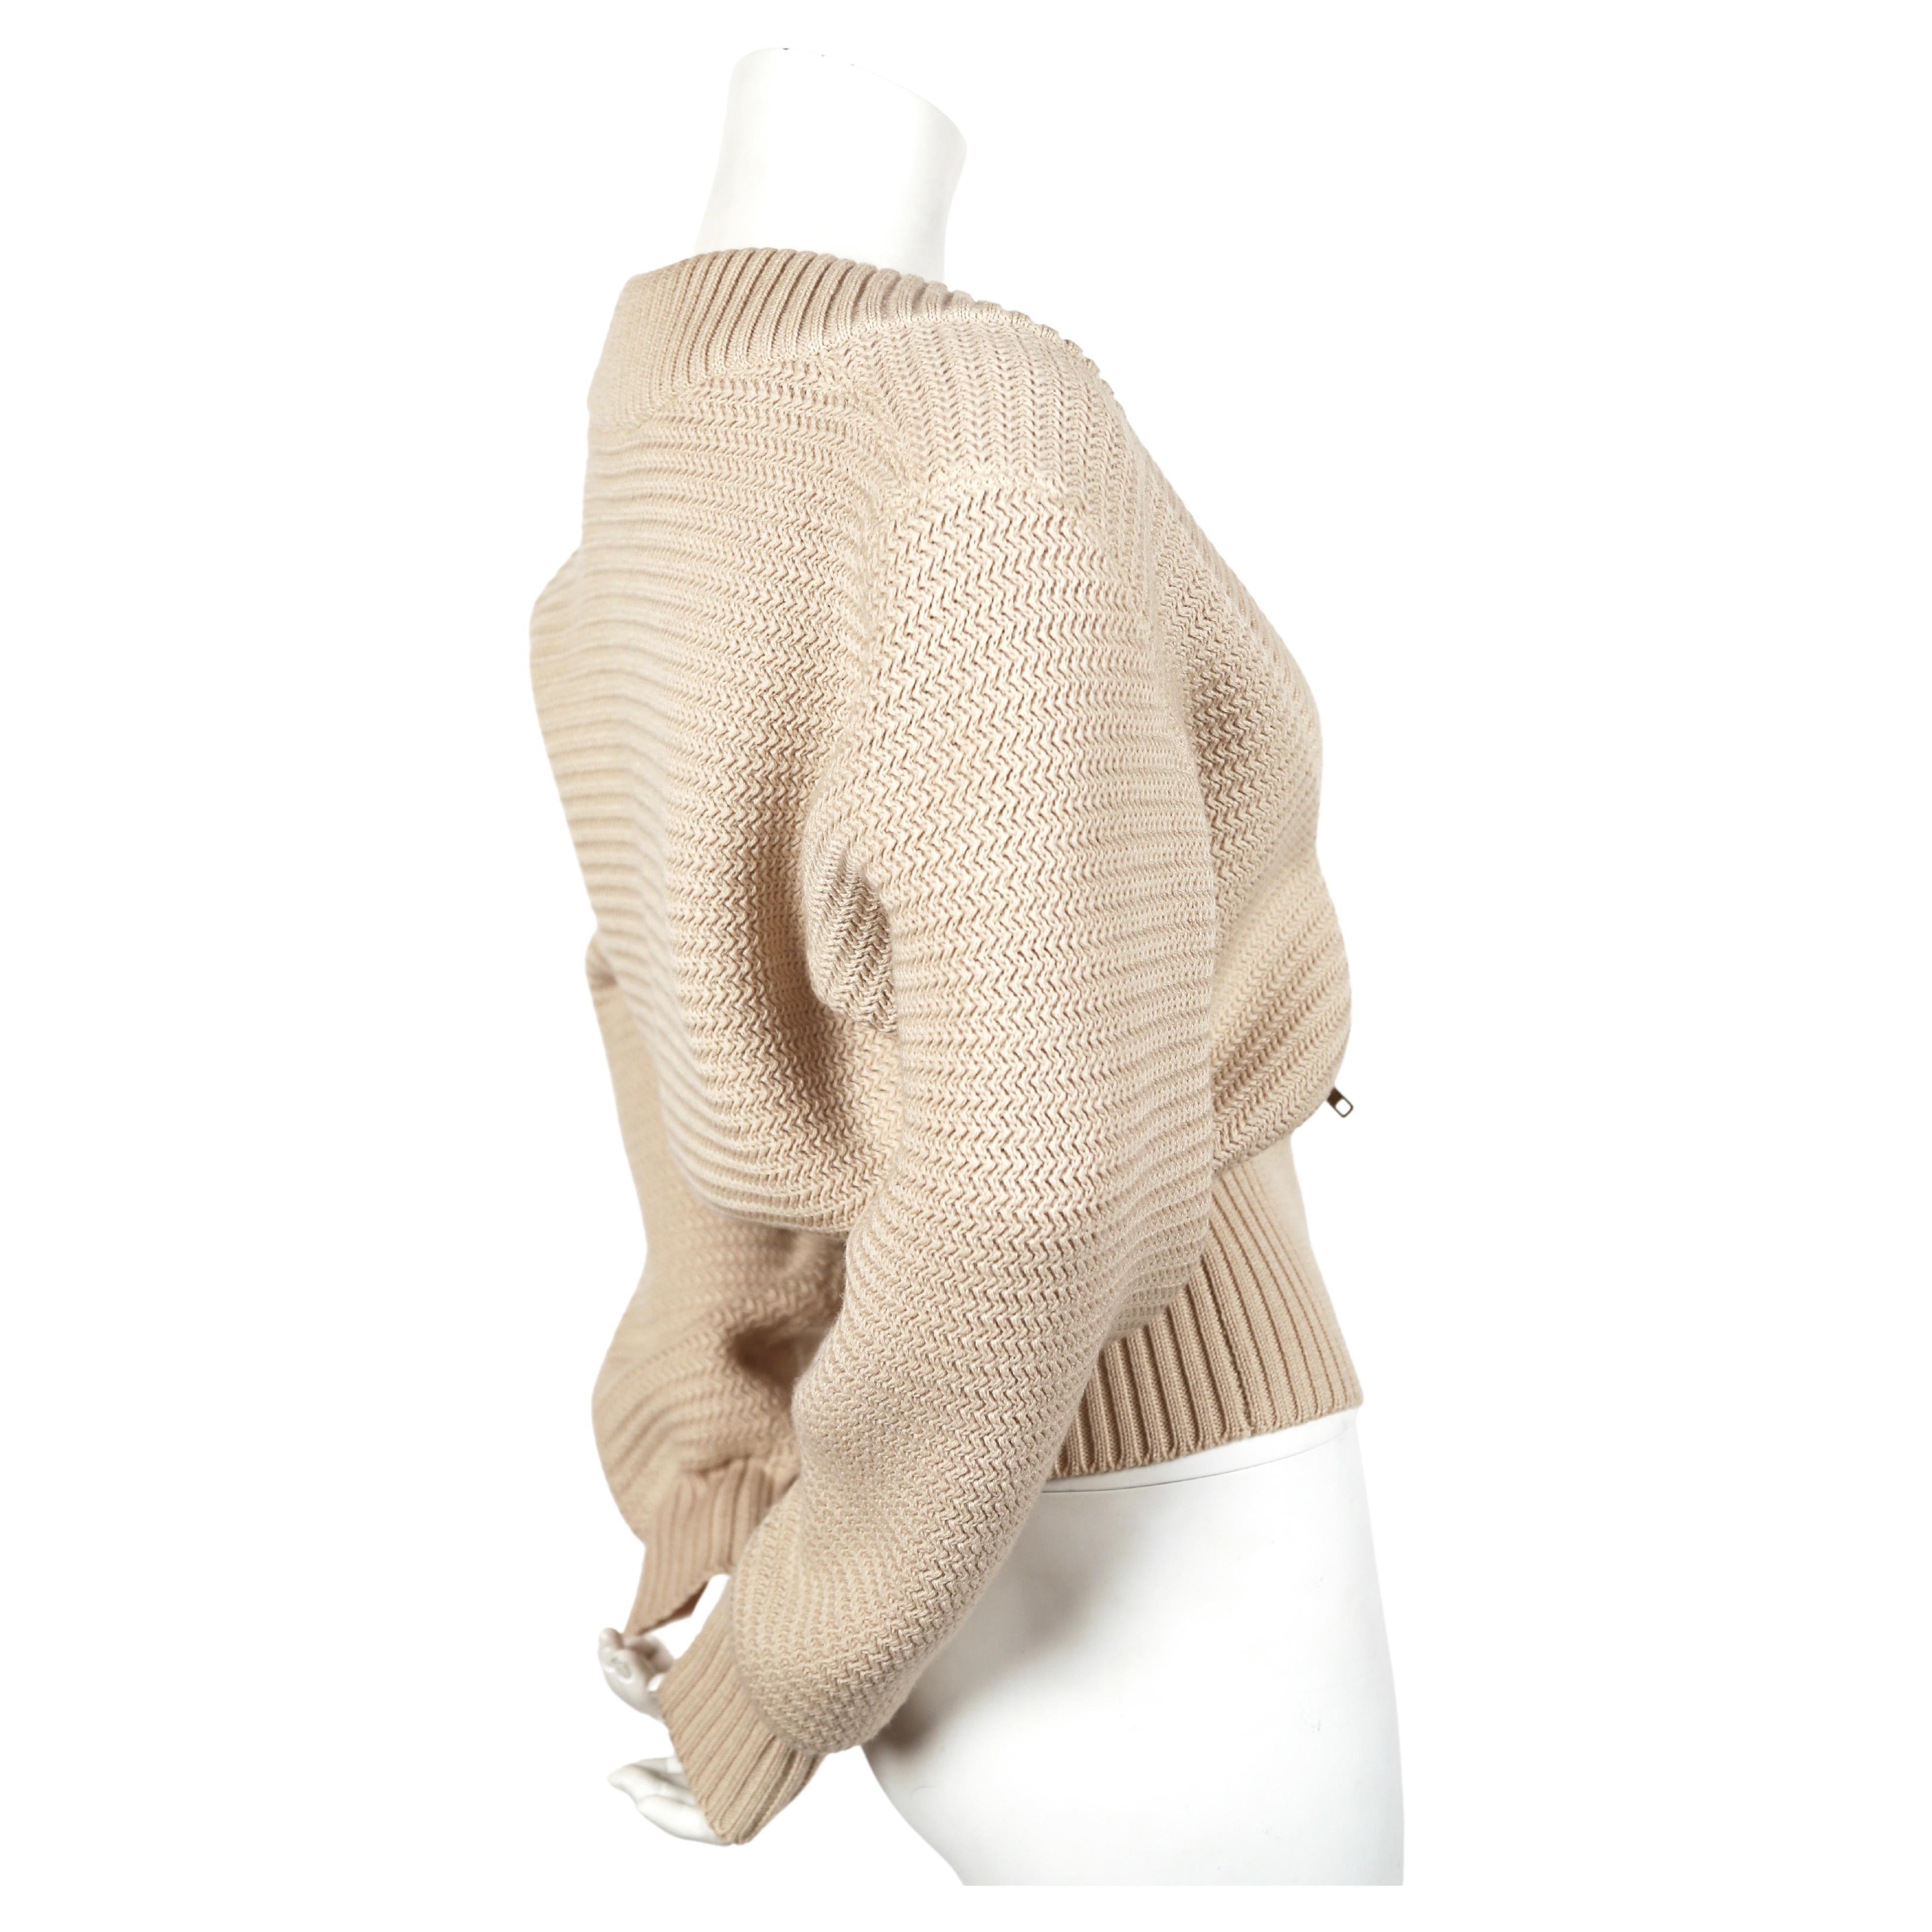 Off-white, densely knit wool cardigan sweater jacket with brass zippers and ribbed trim from Azzedine Alaia dating to fall of 1985. Size 'S'. Approximate measurements: drop shoulder 19